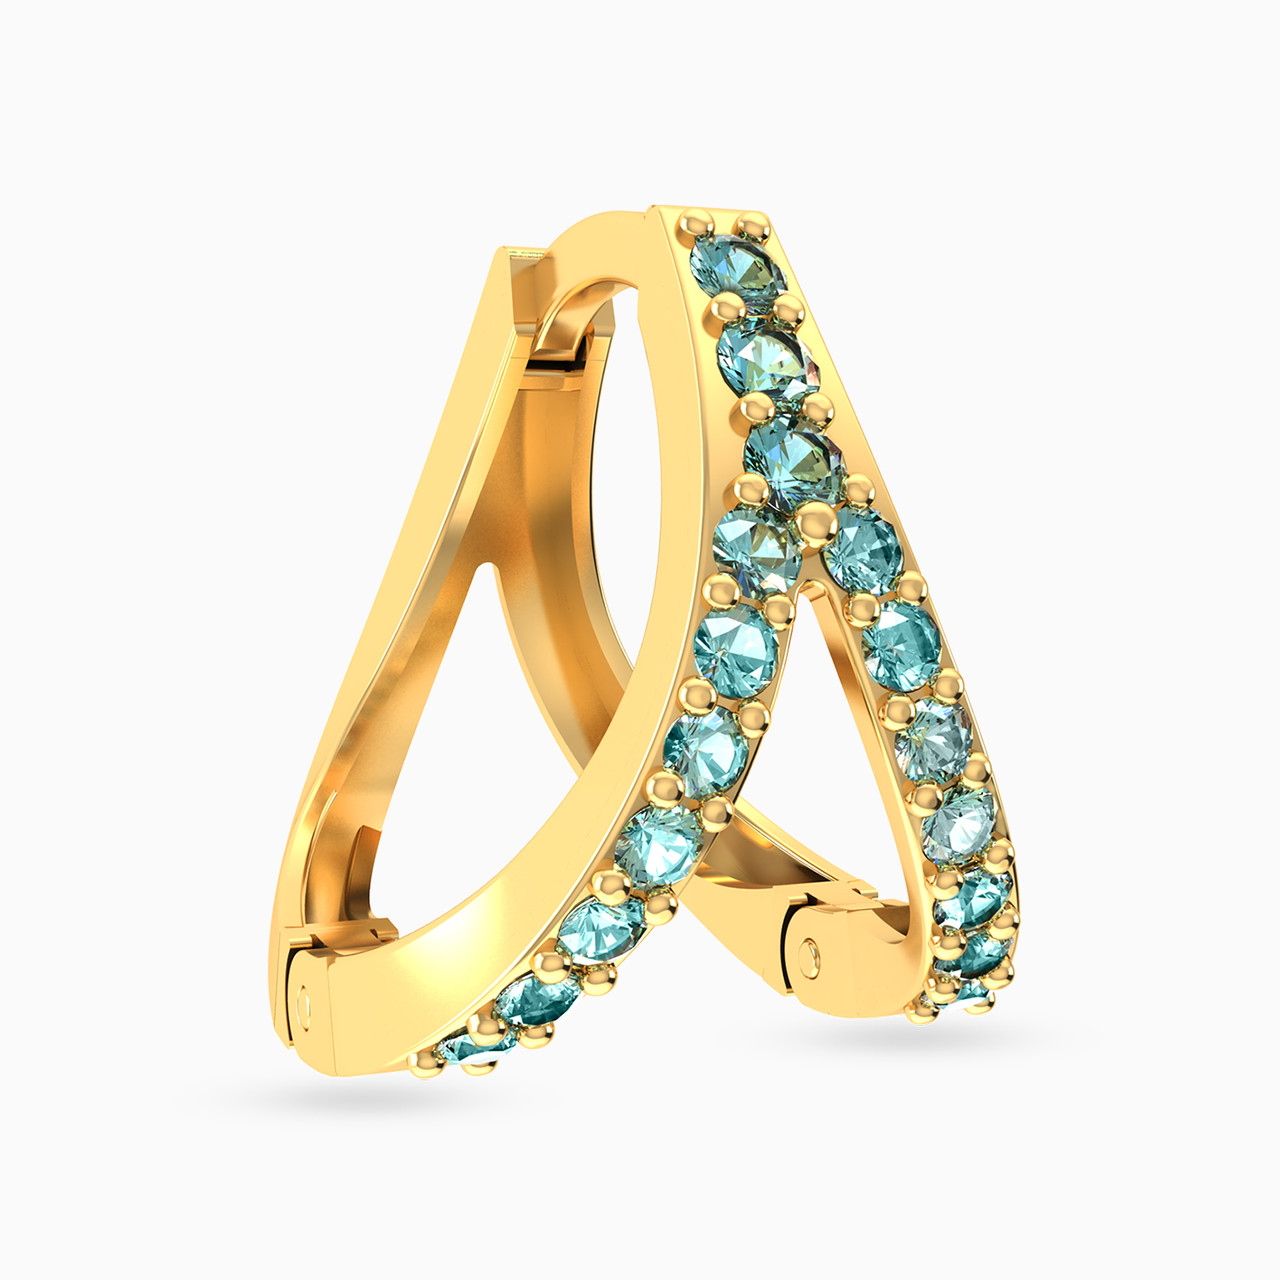 Inverted Y Shaped Colored Stones Hoop Earring in 18K Gold